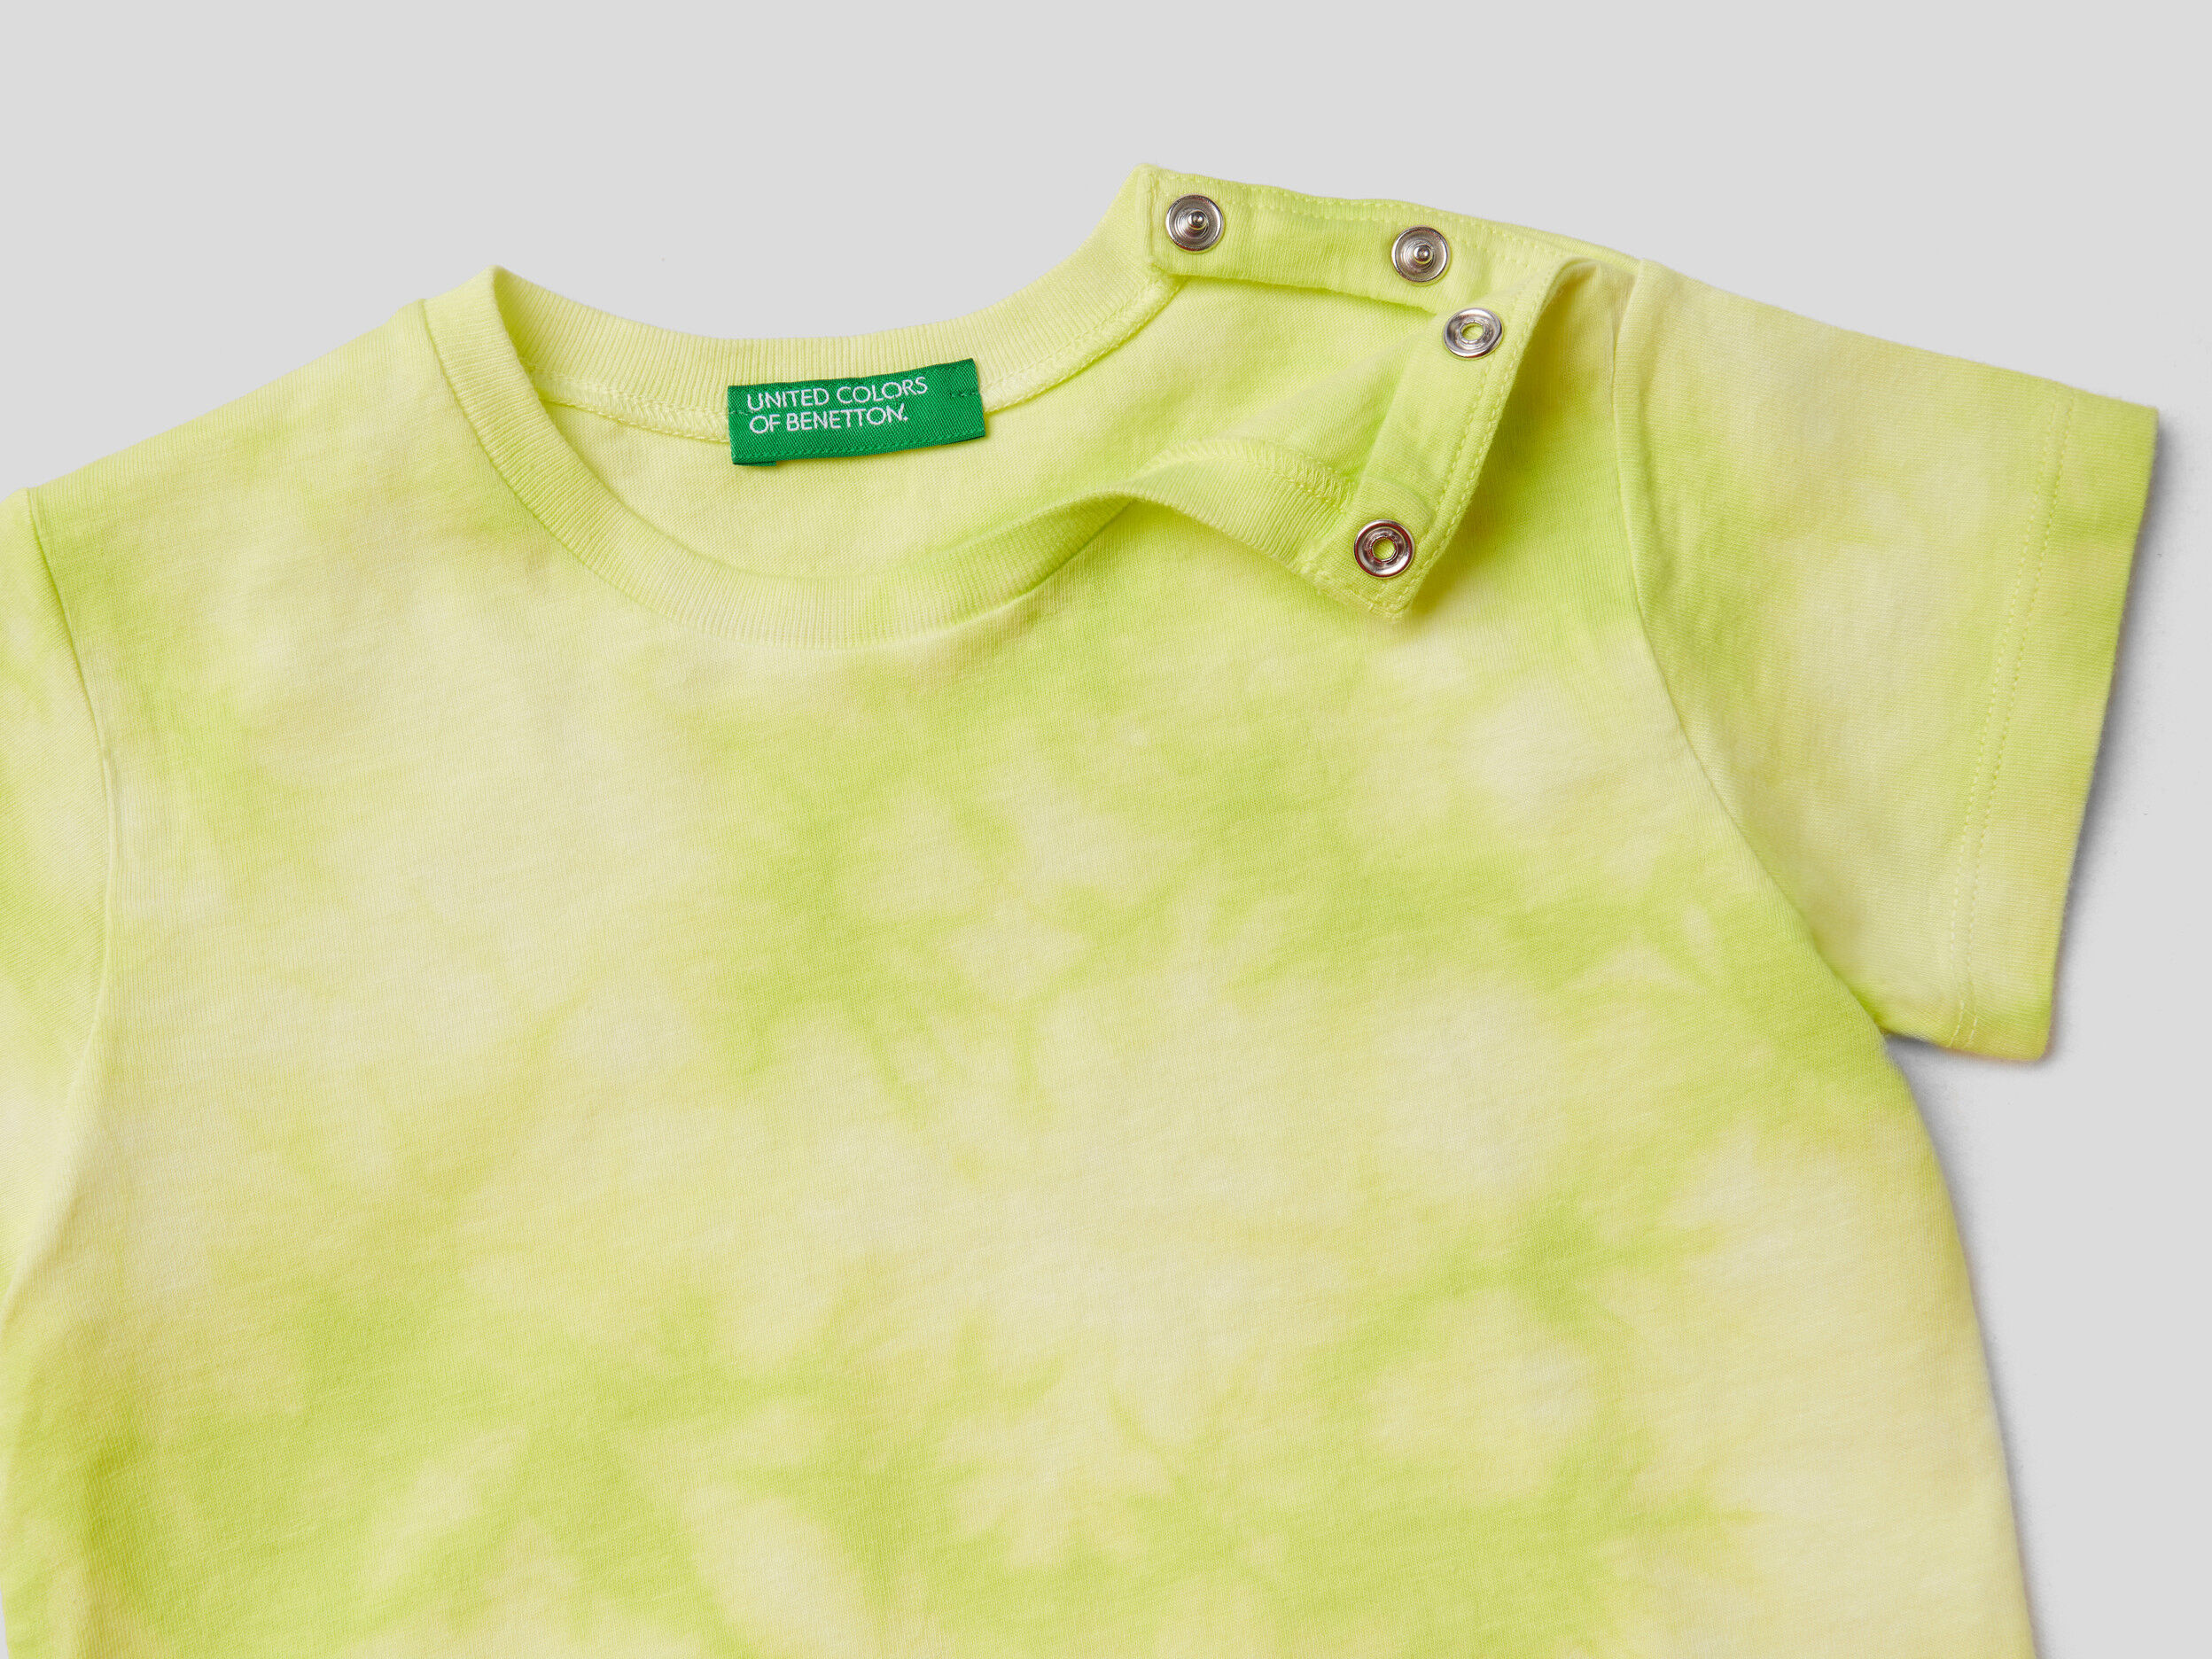 Green Lime Tie Dye Infant One Piece Toddler 3 M 24 M 100% Cotton Short Sleeve 